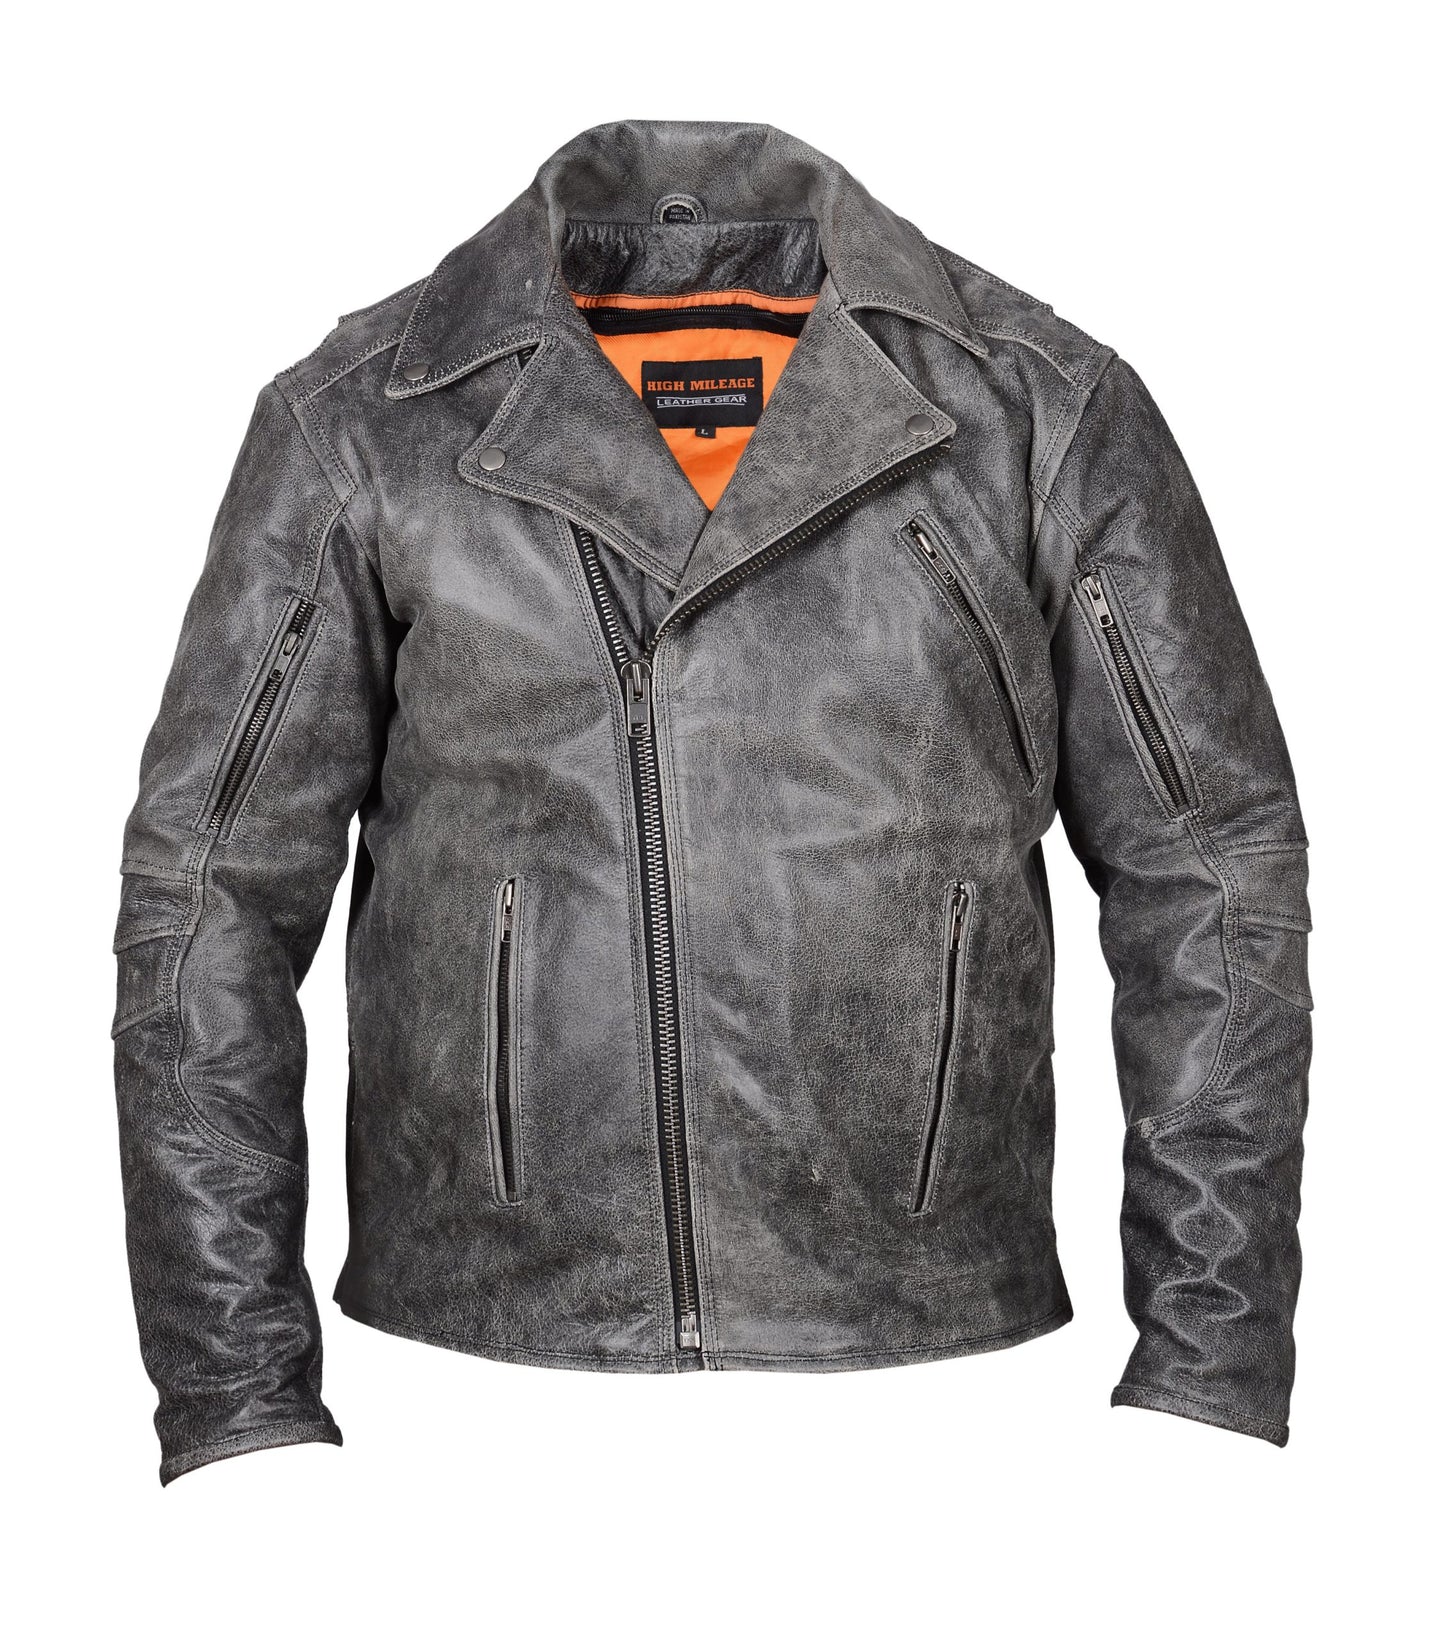 MEN'S POLICE STYLE DISTRESSED GREY LEATHER JACKET